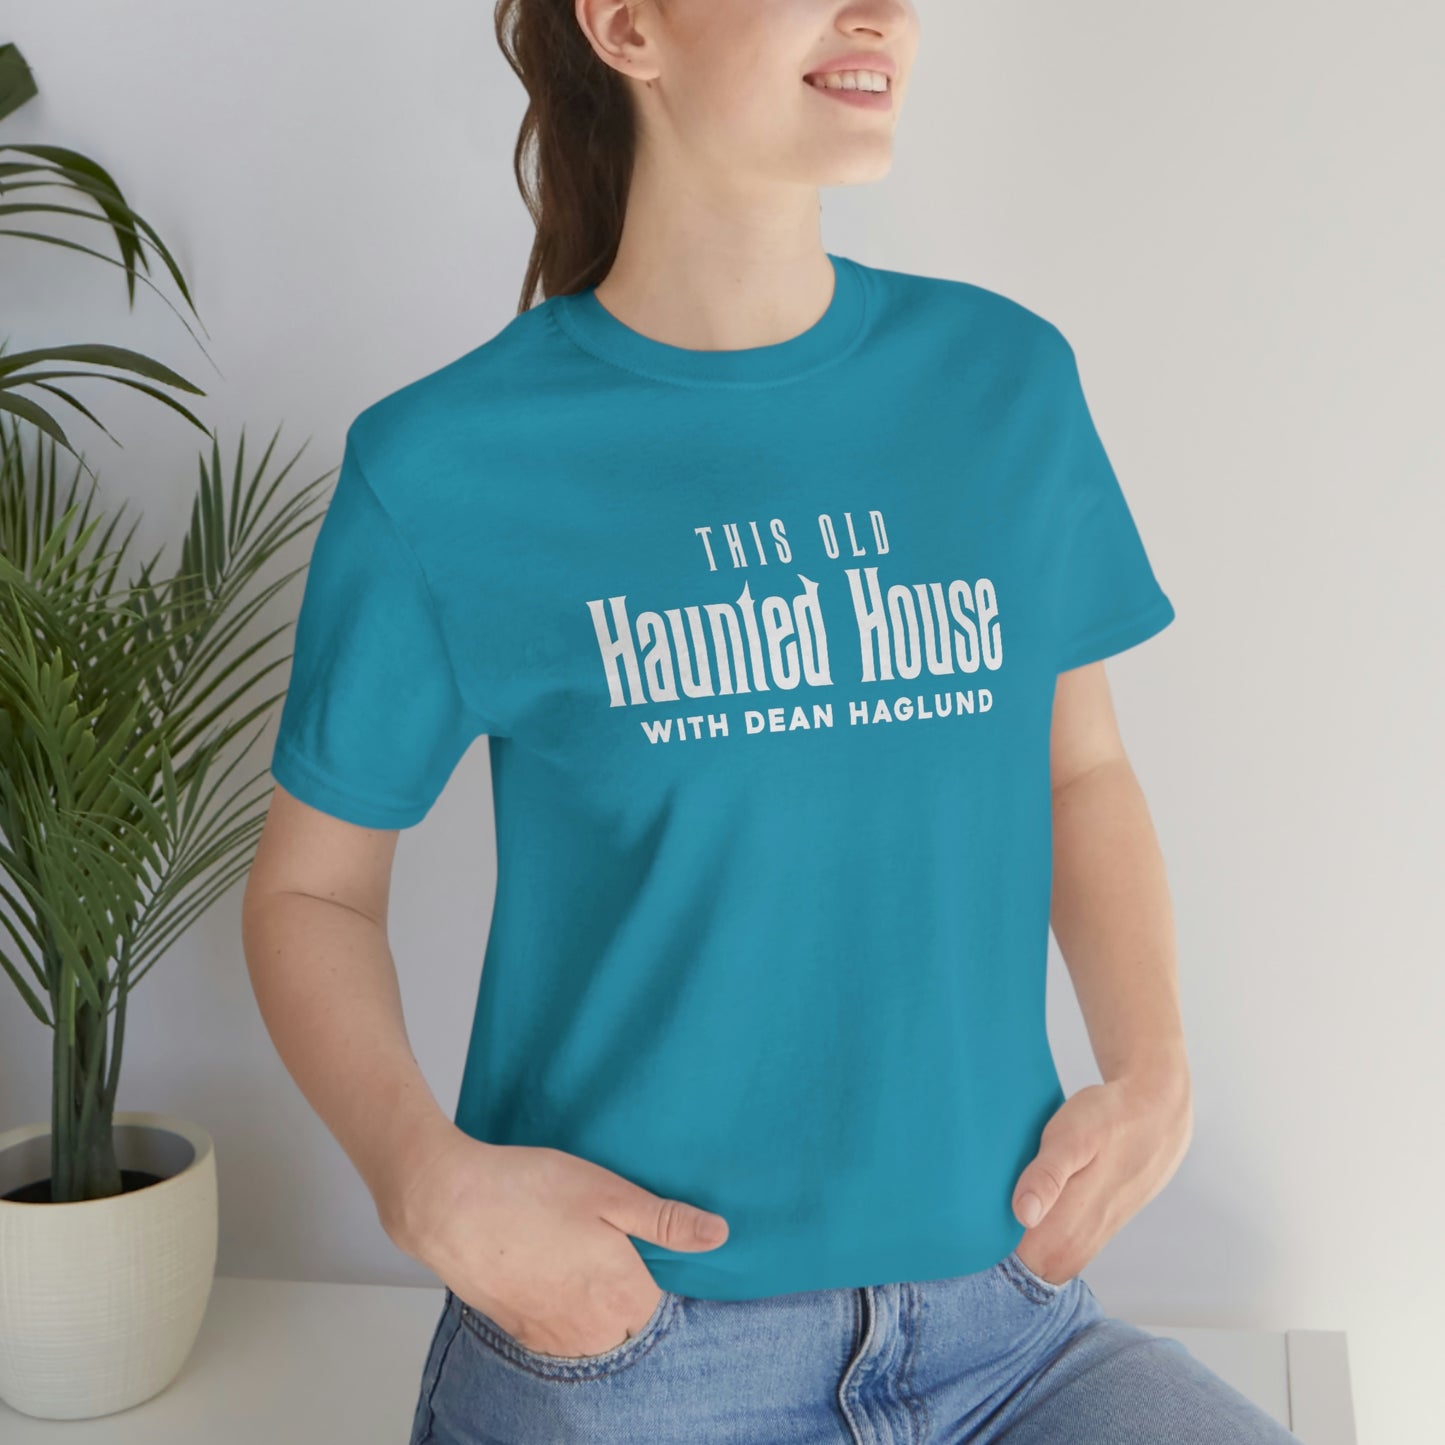 This Old Haunted House Unisex Jersey Short Sleeve Tee